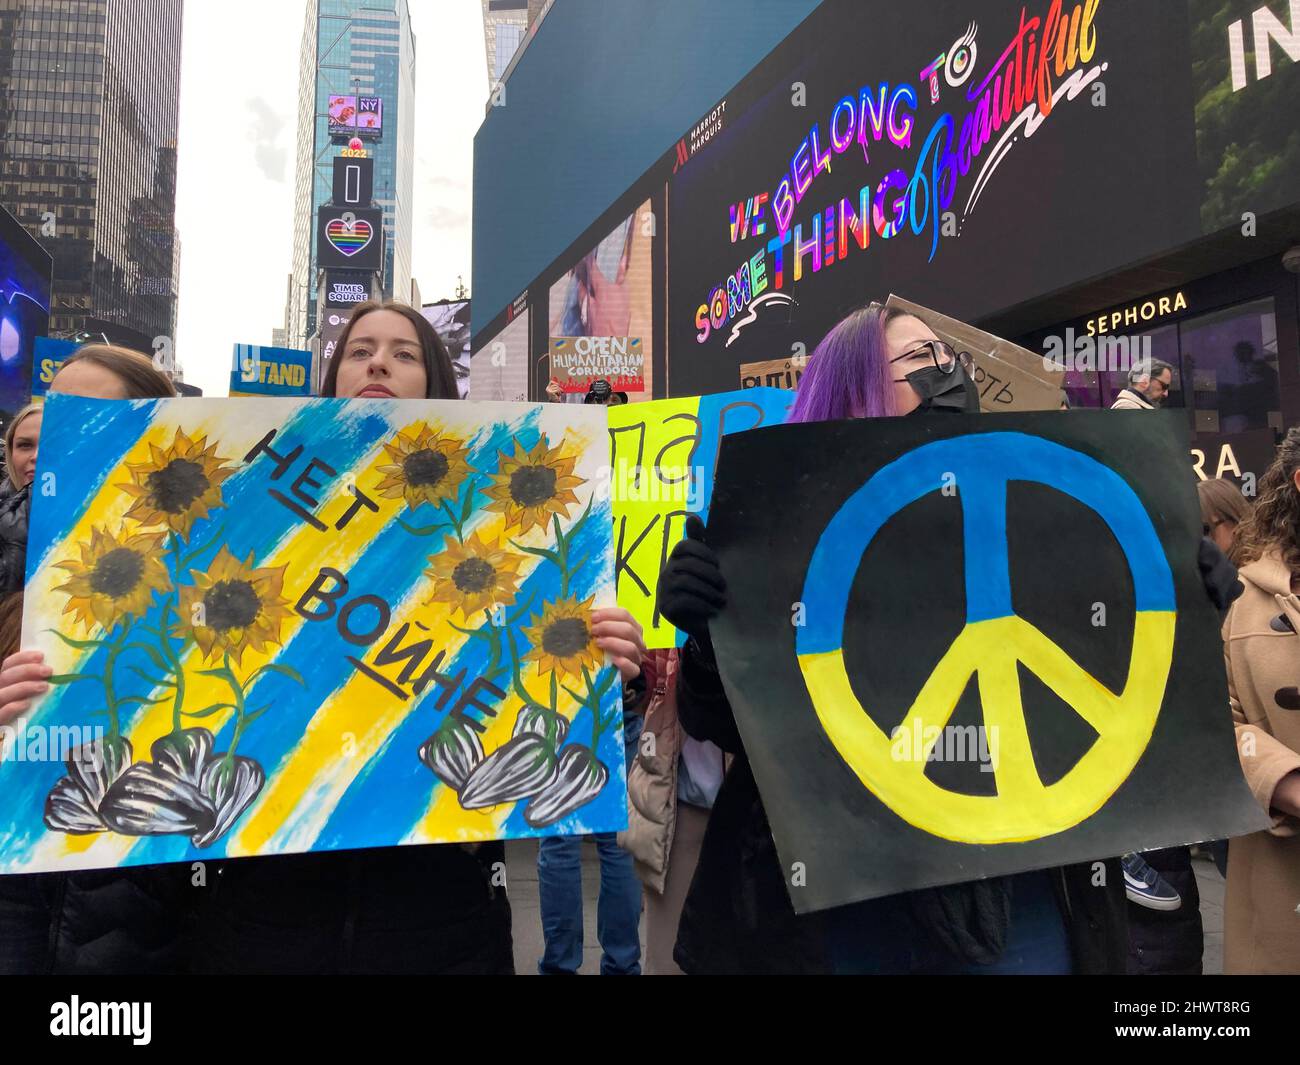 Ukrainian-Americans and their supporters protest the Russian invasion and show support for the citizens of the Ukraine, in Times Square in New York on Saturday, March 5, 2022. (© Frances M. Roberts) Stock Photo